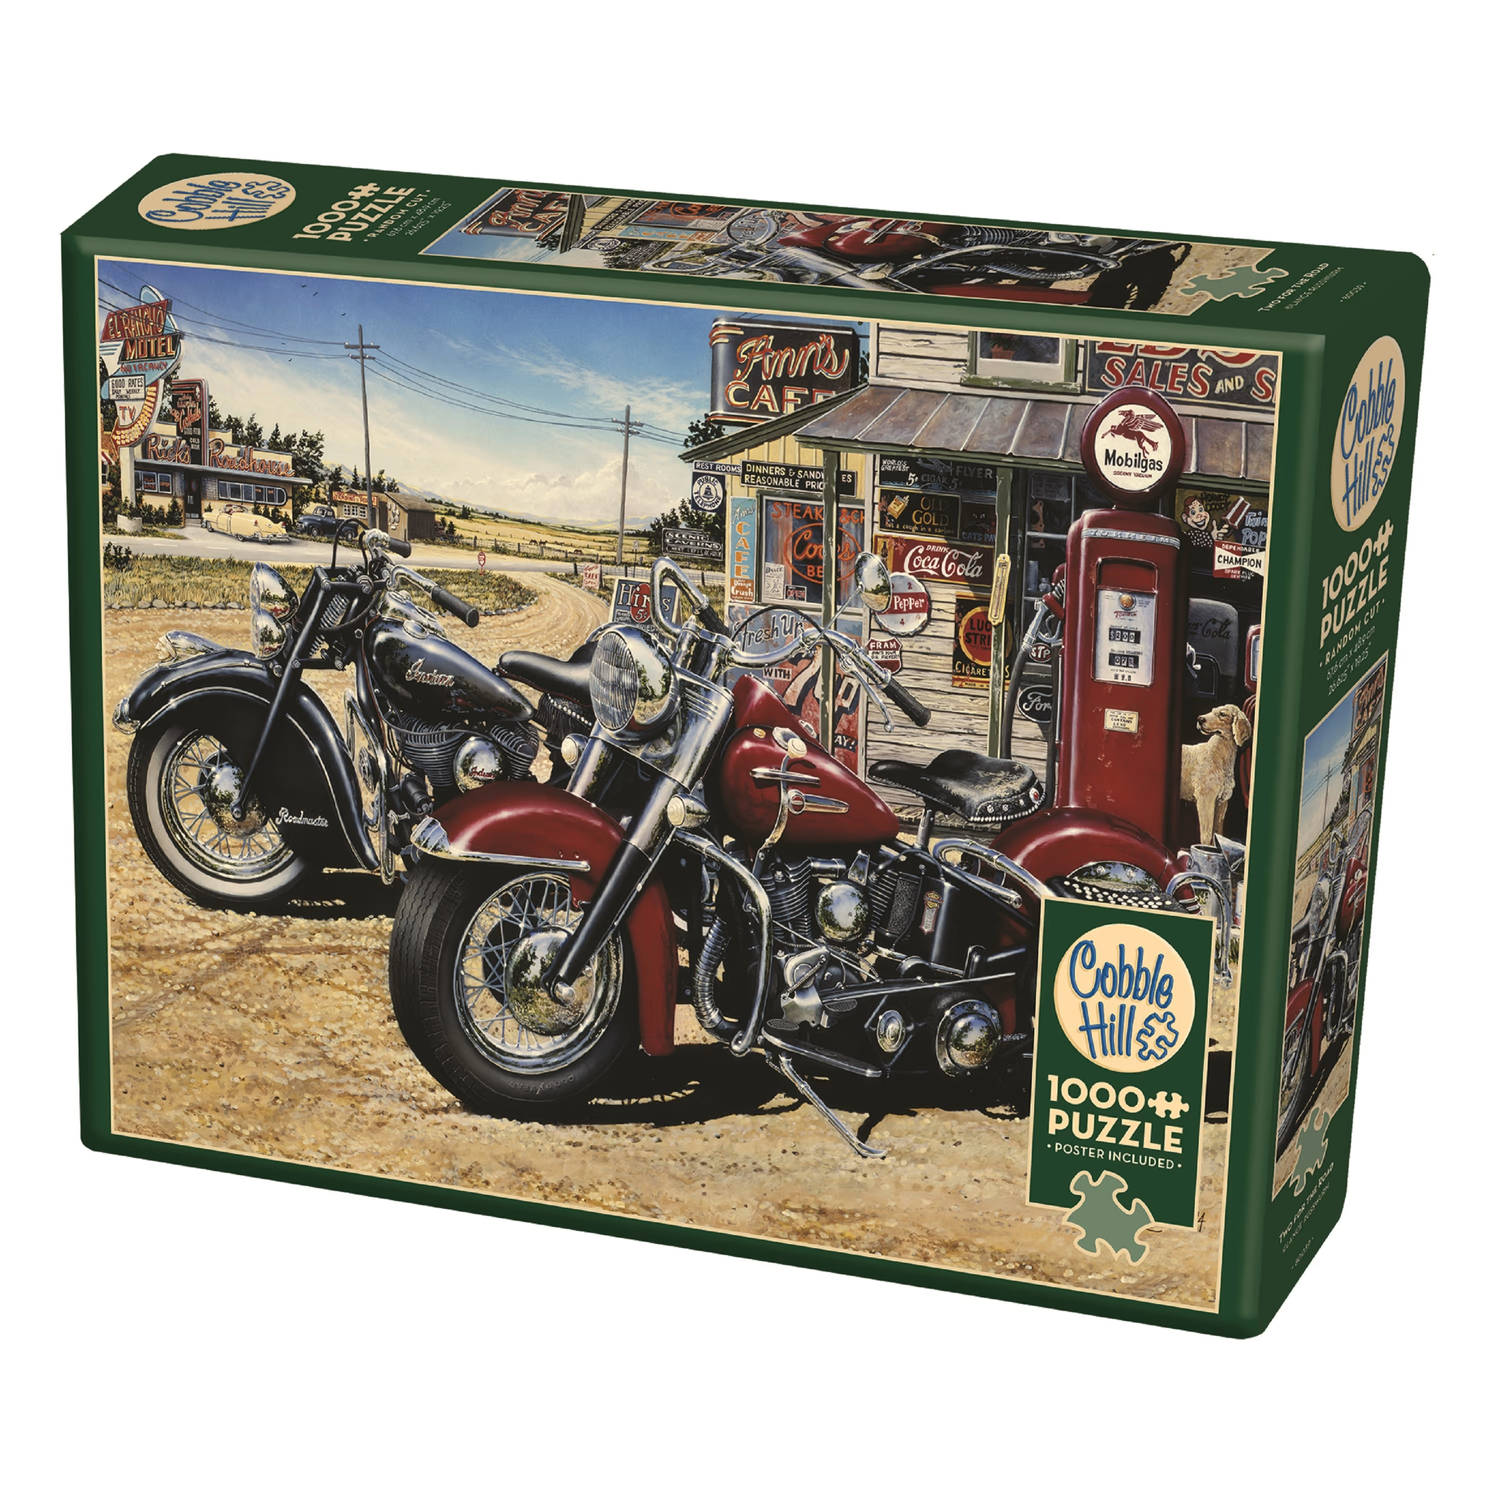 Cobble Hill puzzle 1000 pieces - Two for the road